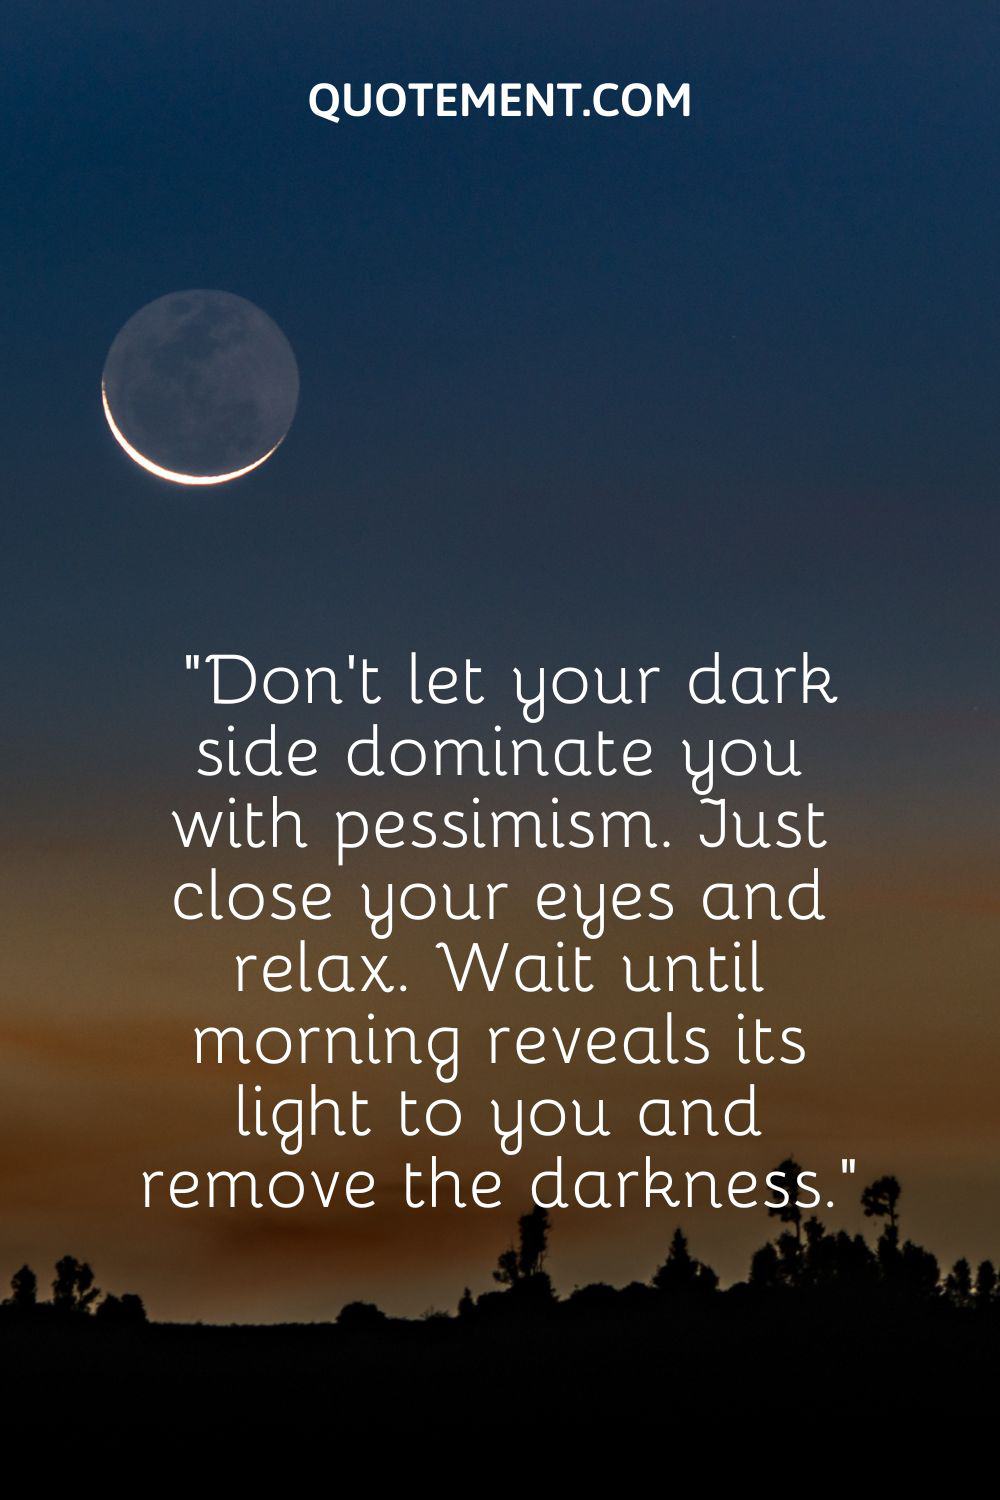 Don’t let your dark side dominate you with pessimism